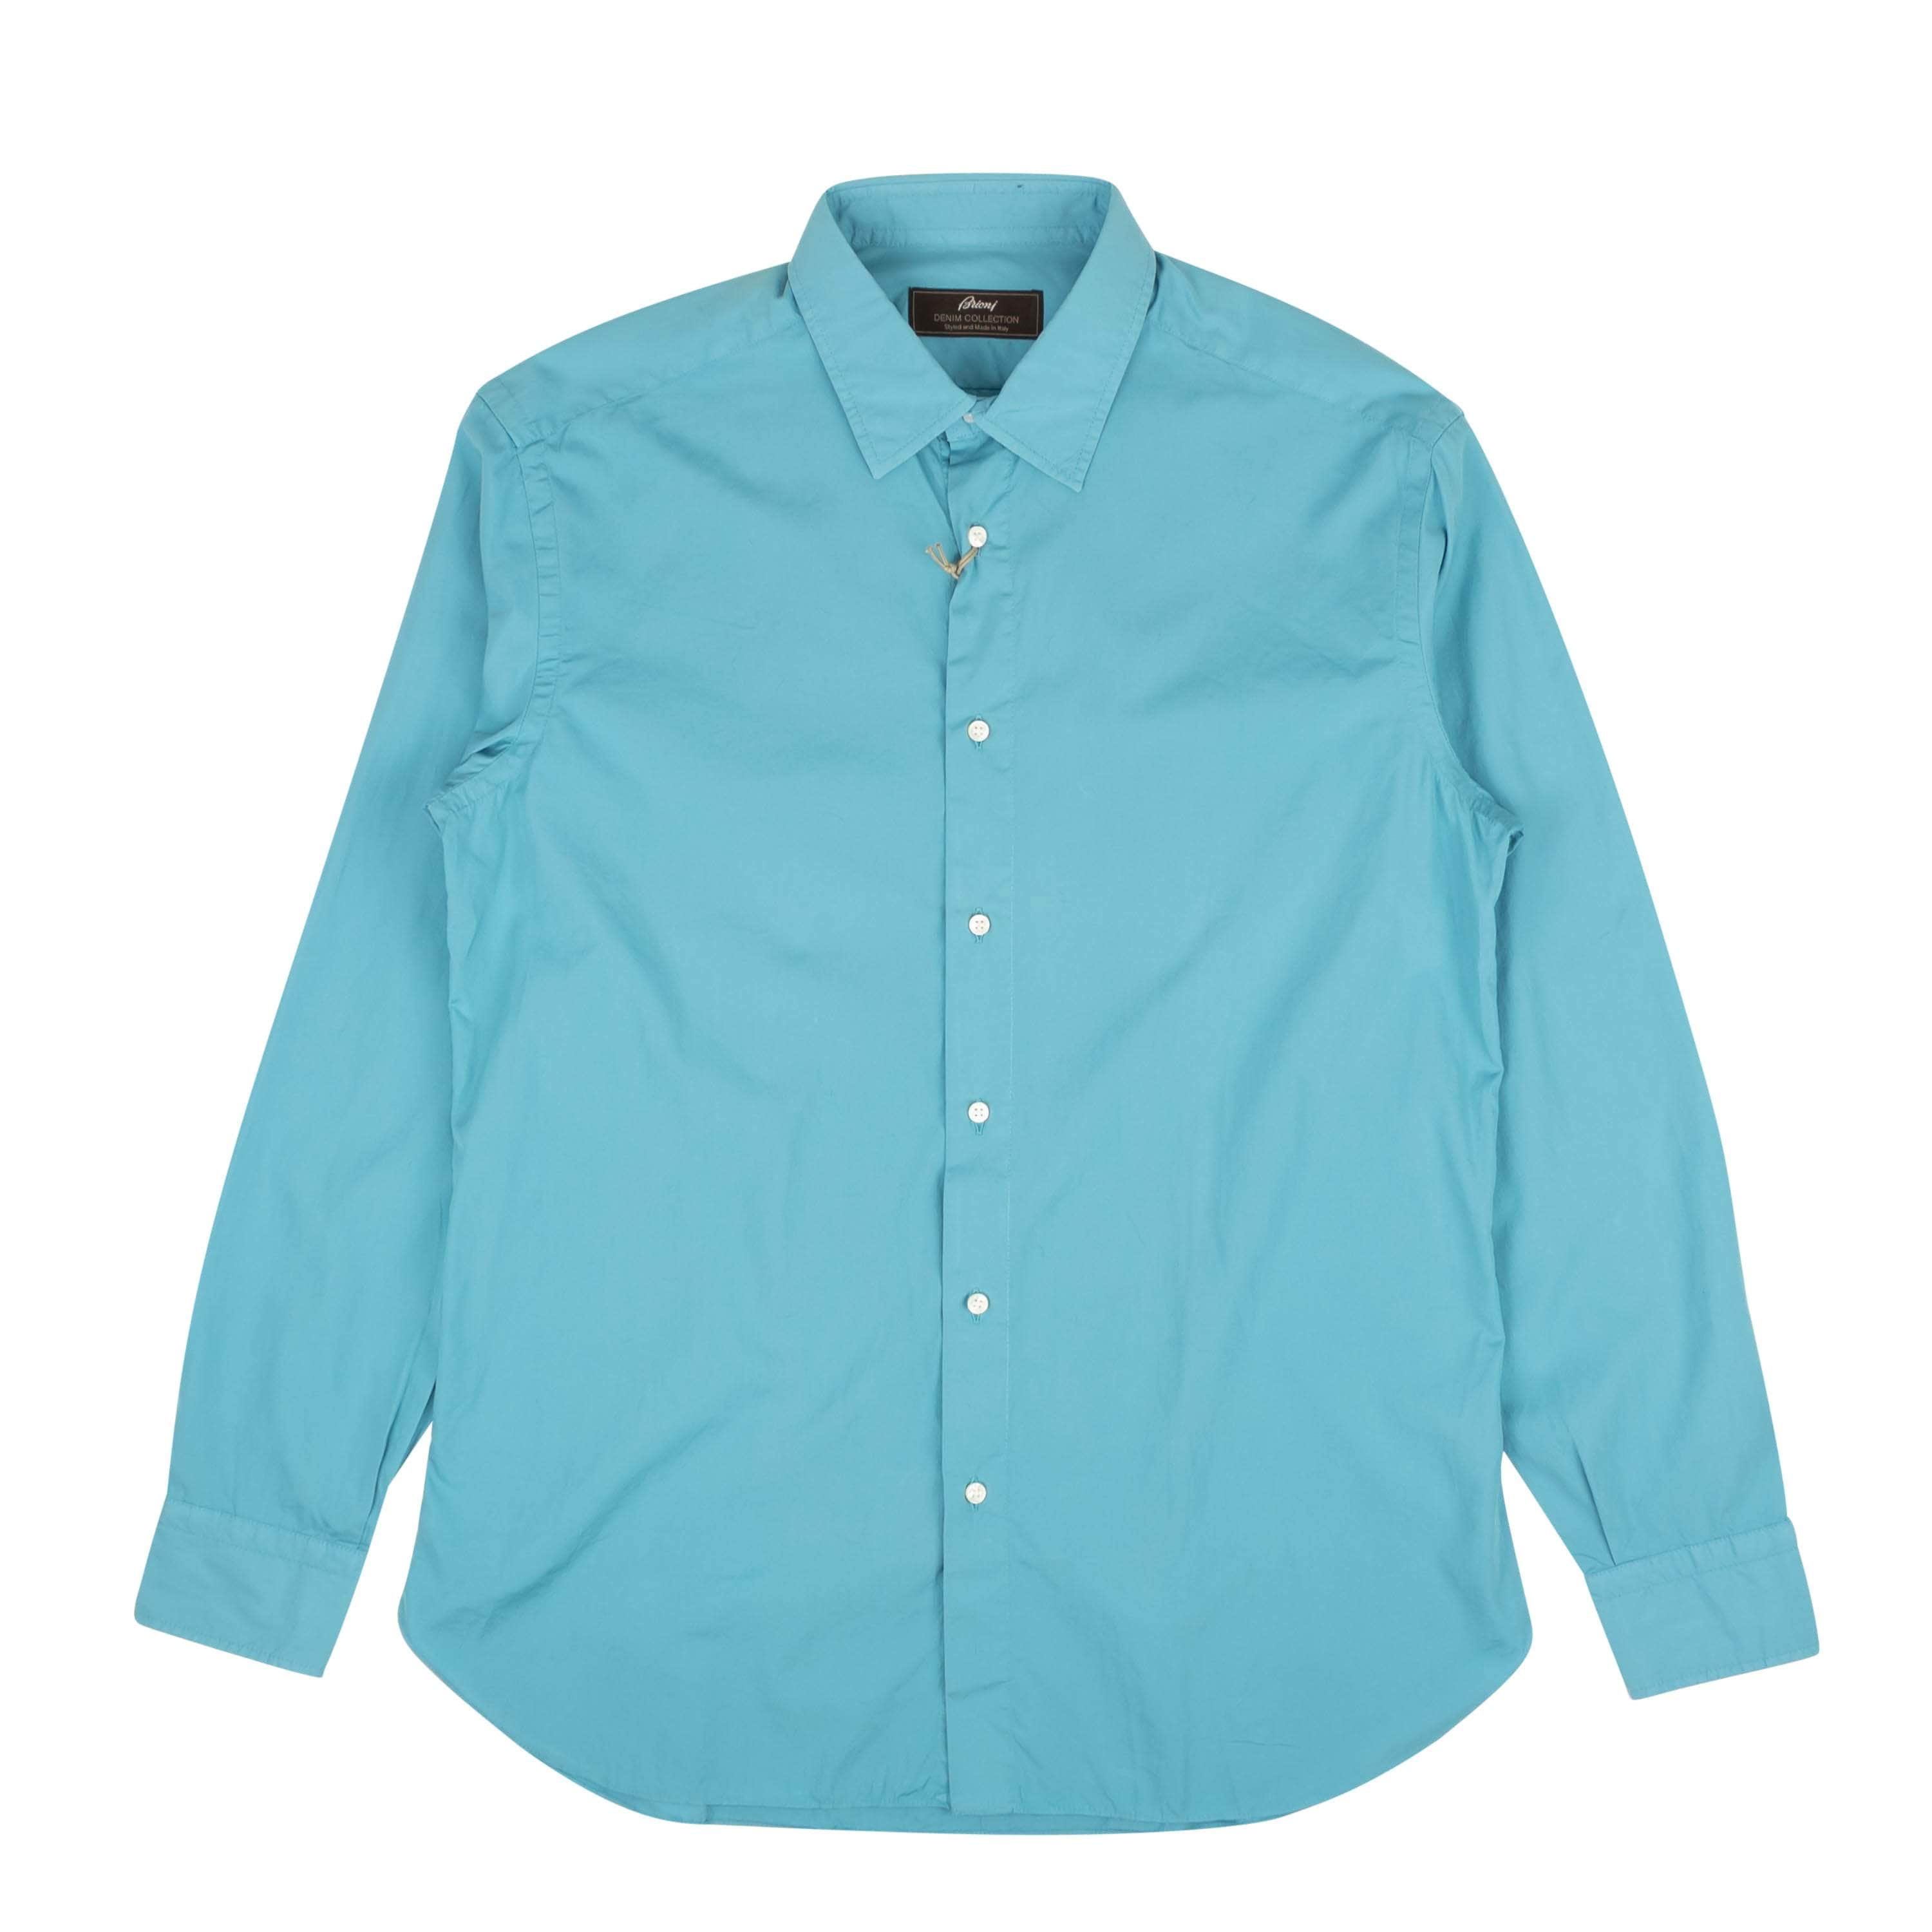 Brioni 250-500, channelenable-all, chicmi, couponcollection, gender-mens, main-clothing, mens-shoes, size-3 3 Teal Blue Slim-Fit Long Sleeve Cotton Casual Shirt 95-BNI-1003/3 95-BNI-1003/3